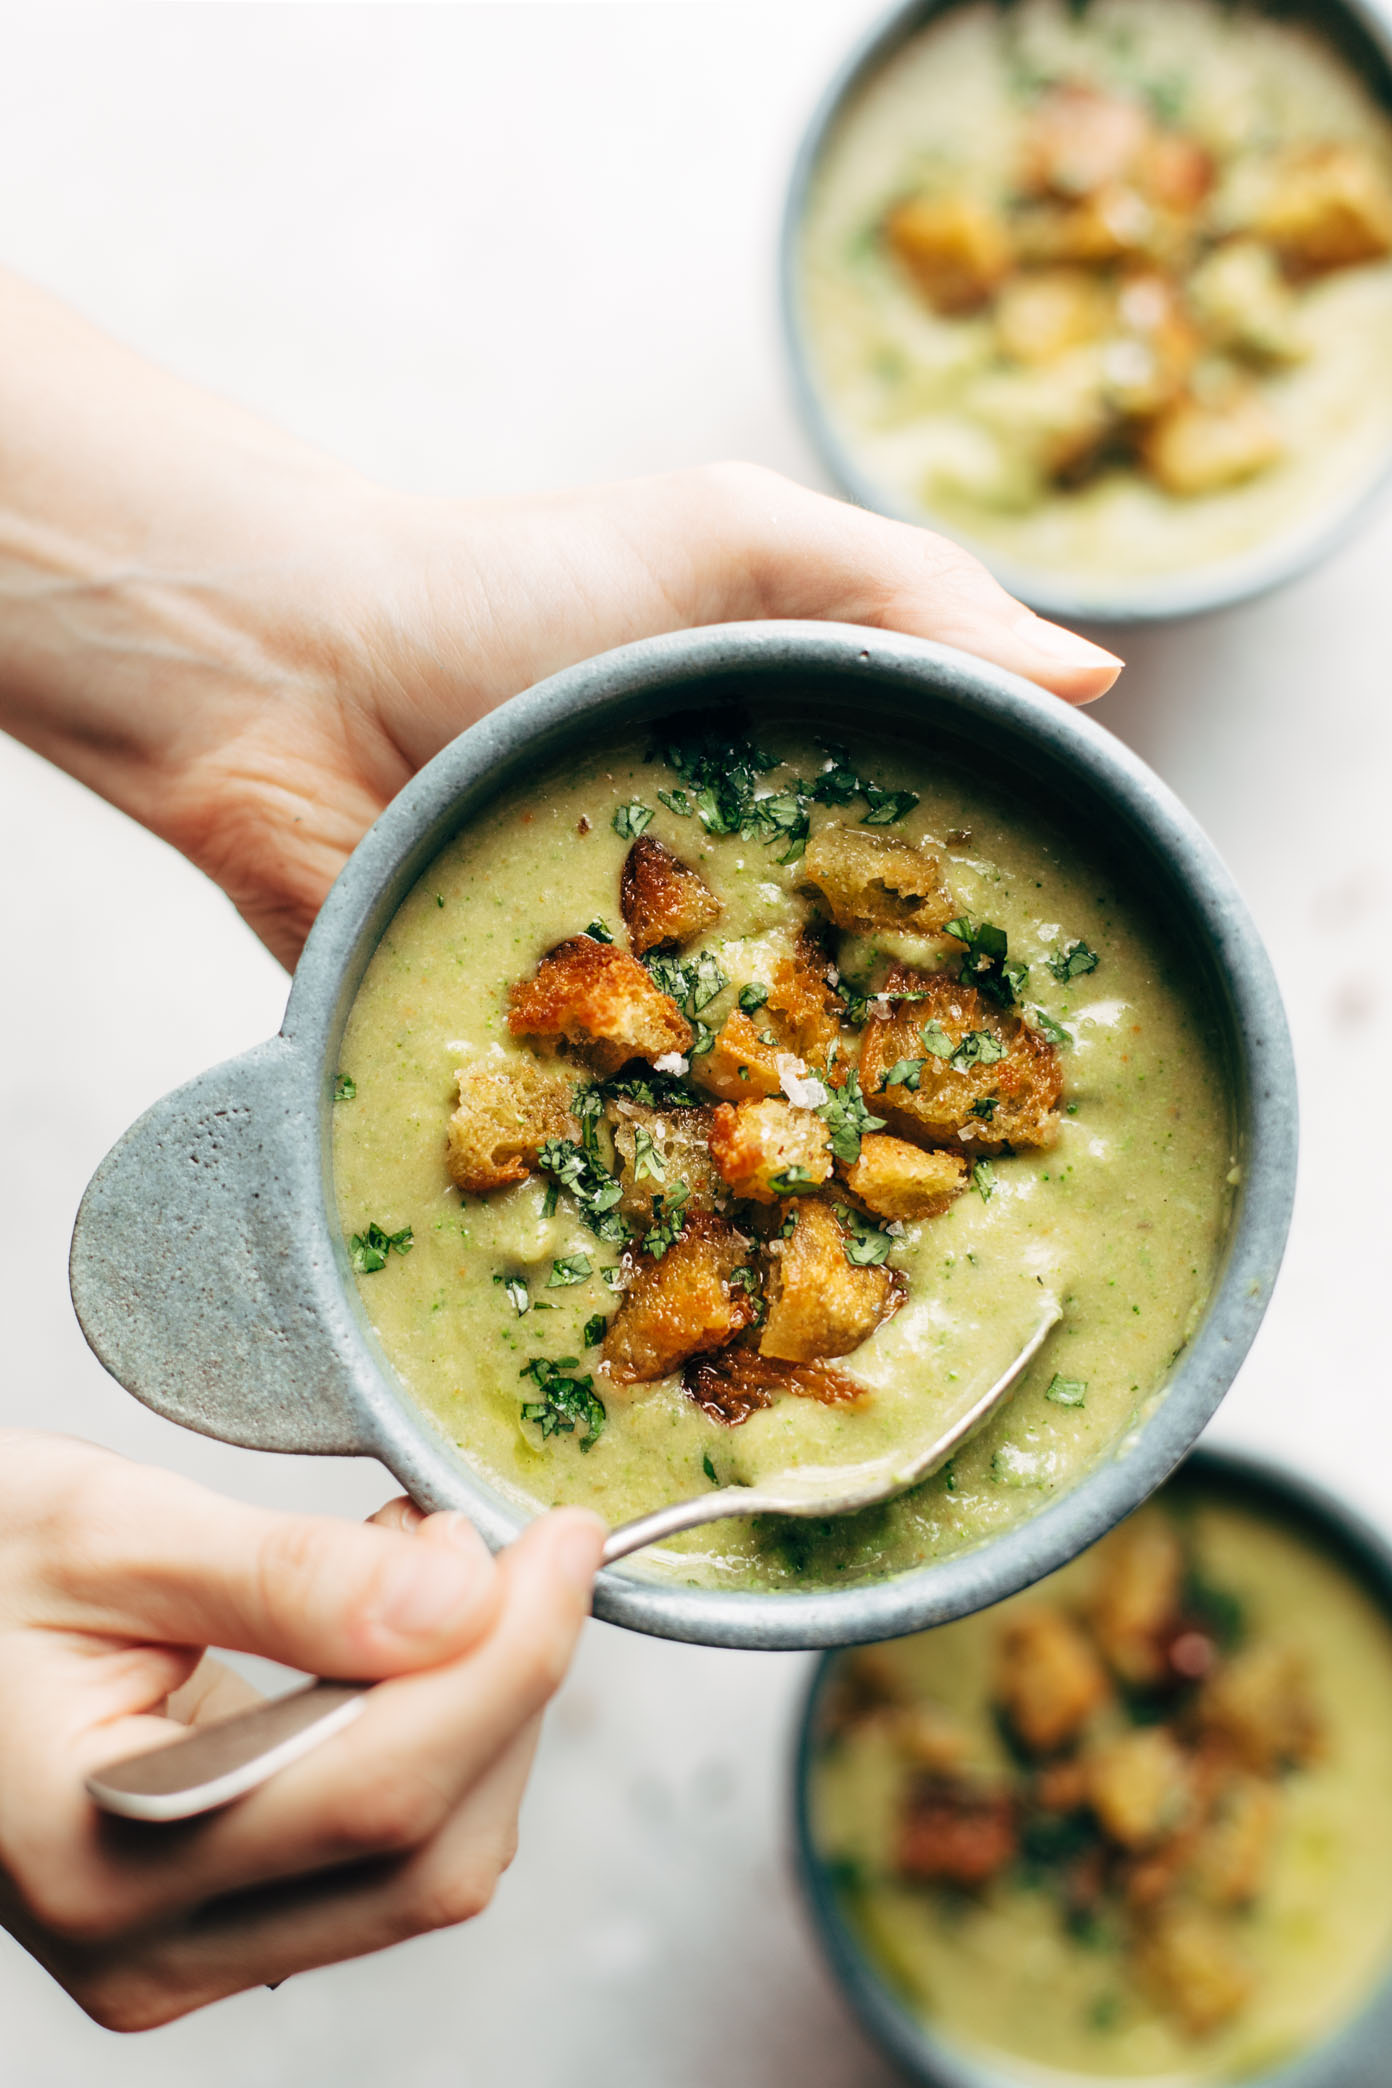 THE BEST detox broccoli cheese soup has silky smooth texture and classic broccoli cheese flavor with exactly zero ingredients out of a can. Real food meets comfort food. vegan / gluten free / vegetarian. | pinchofyum.com